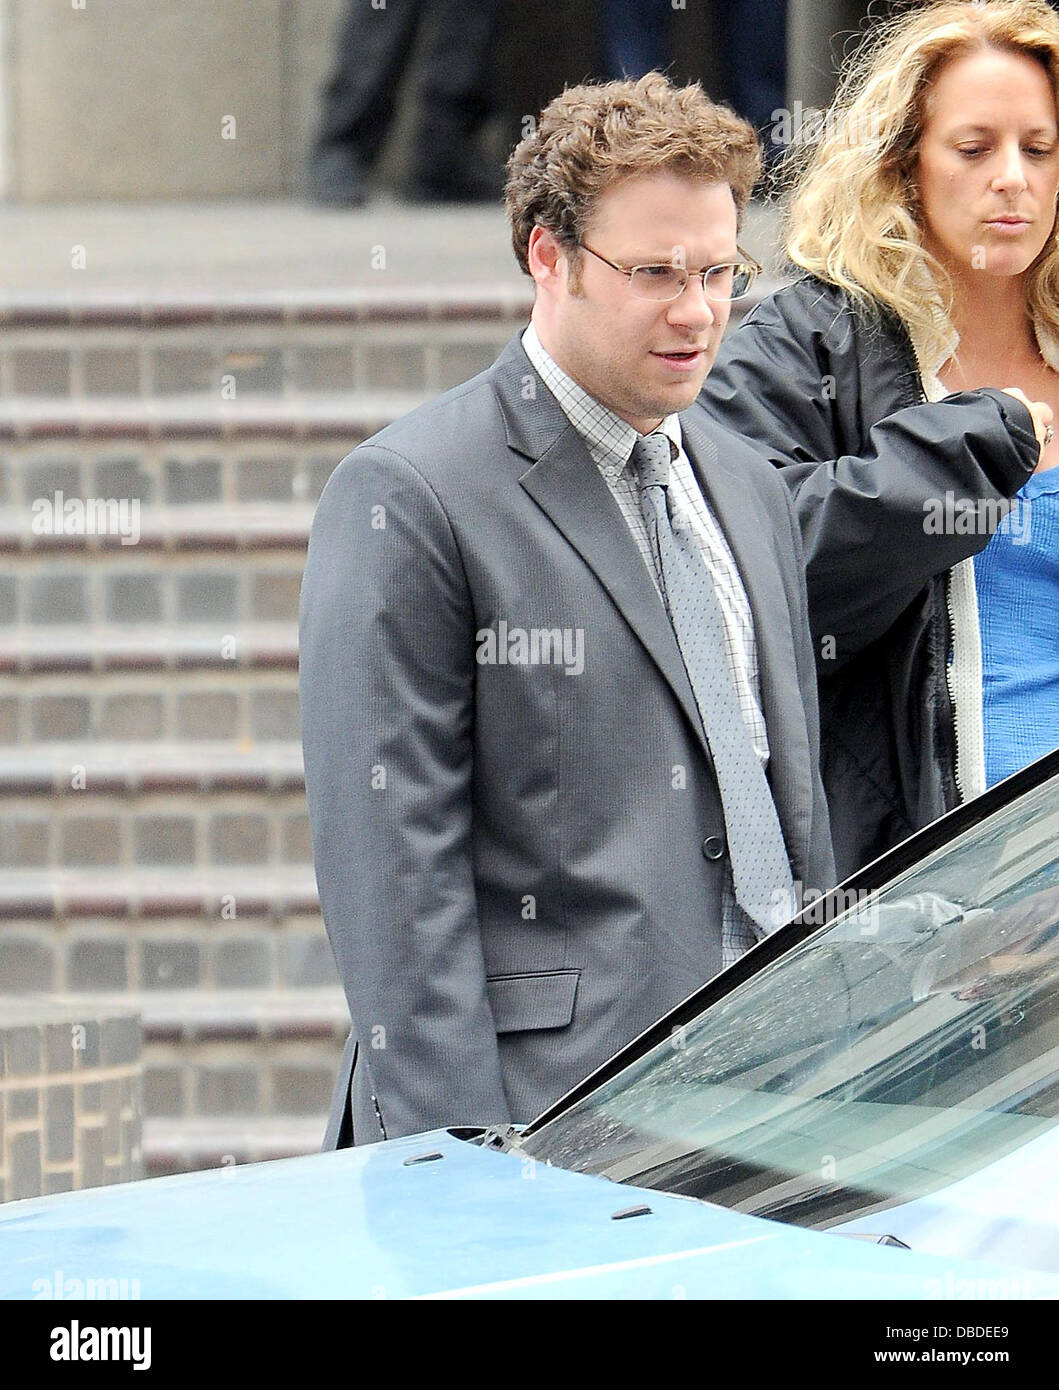 Seth Rogen filming on loation his new movie 'My Mother's Curse' Los Angeles, California - 23.05.11 Stock Photo